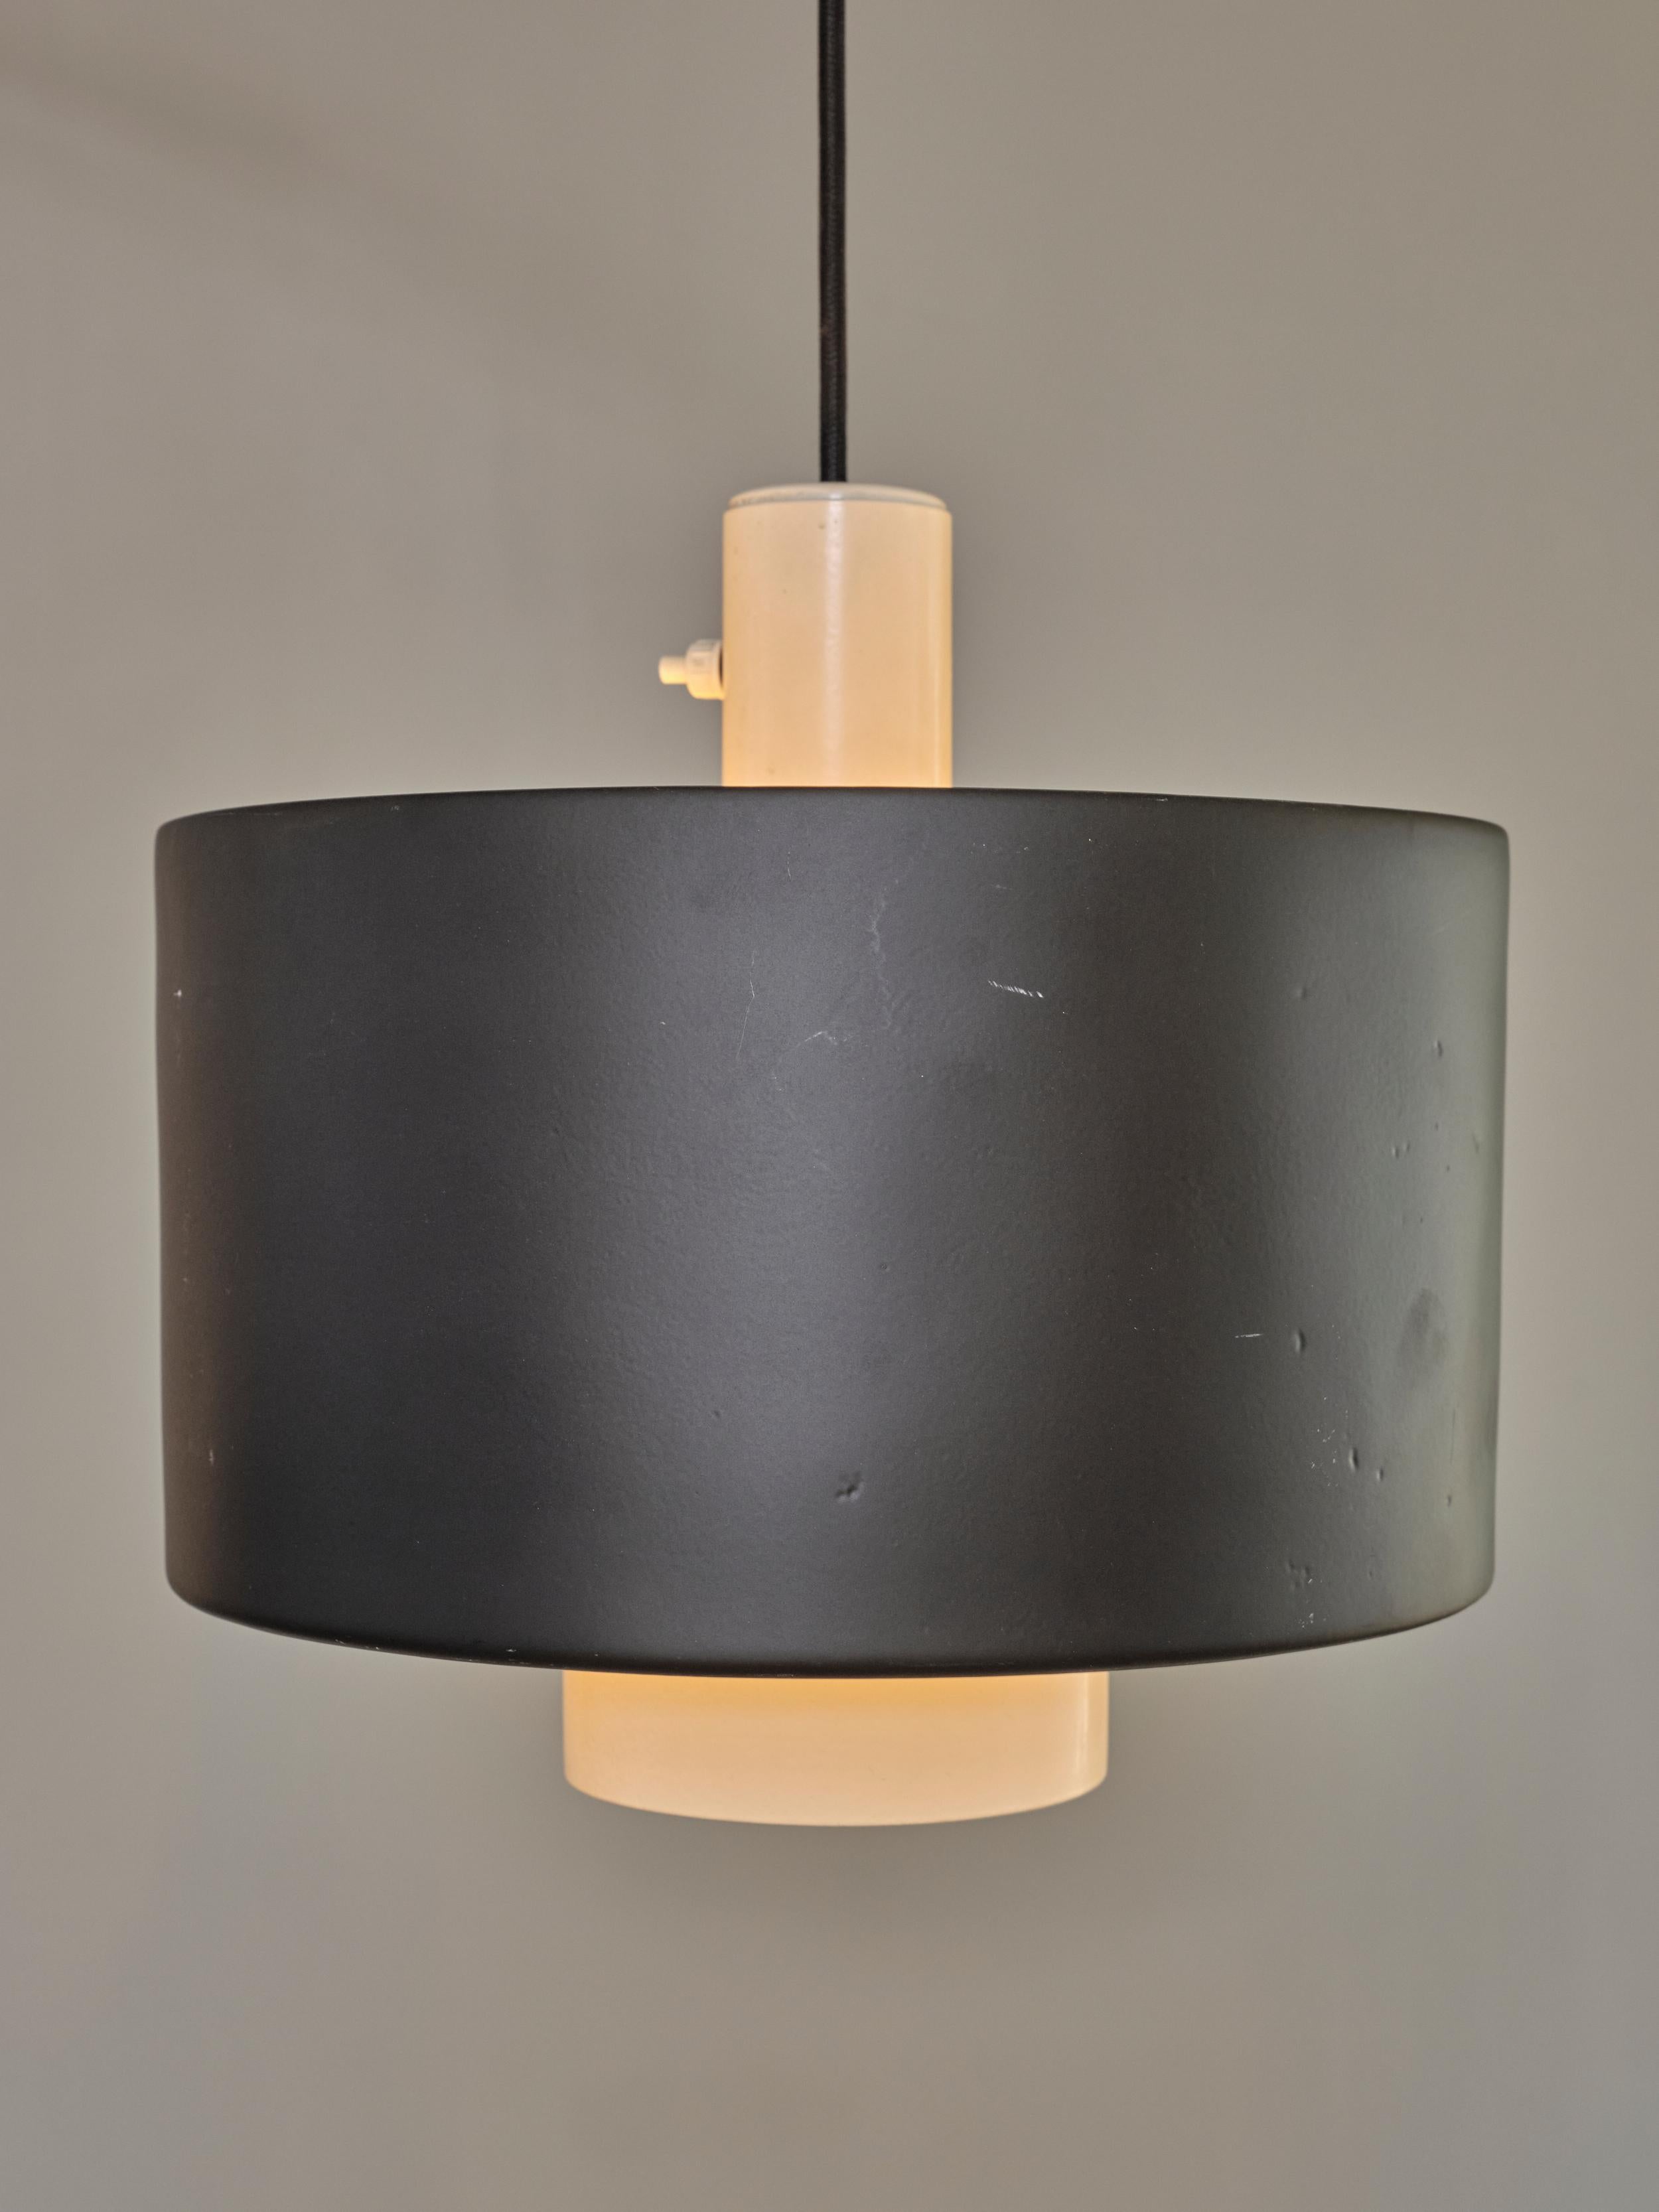 Wall Mounted Pendant Lamp designed by the renowned Italian designer, Gaetano Sciolari and produced by Stilnovo crafted with a combination of metal and brass elements. The wall-mounted pendant design allows this lamp to extend from the wall, casting